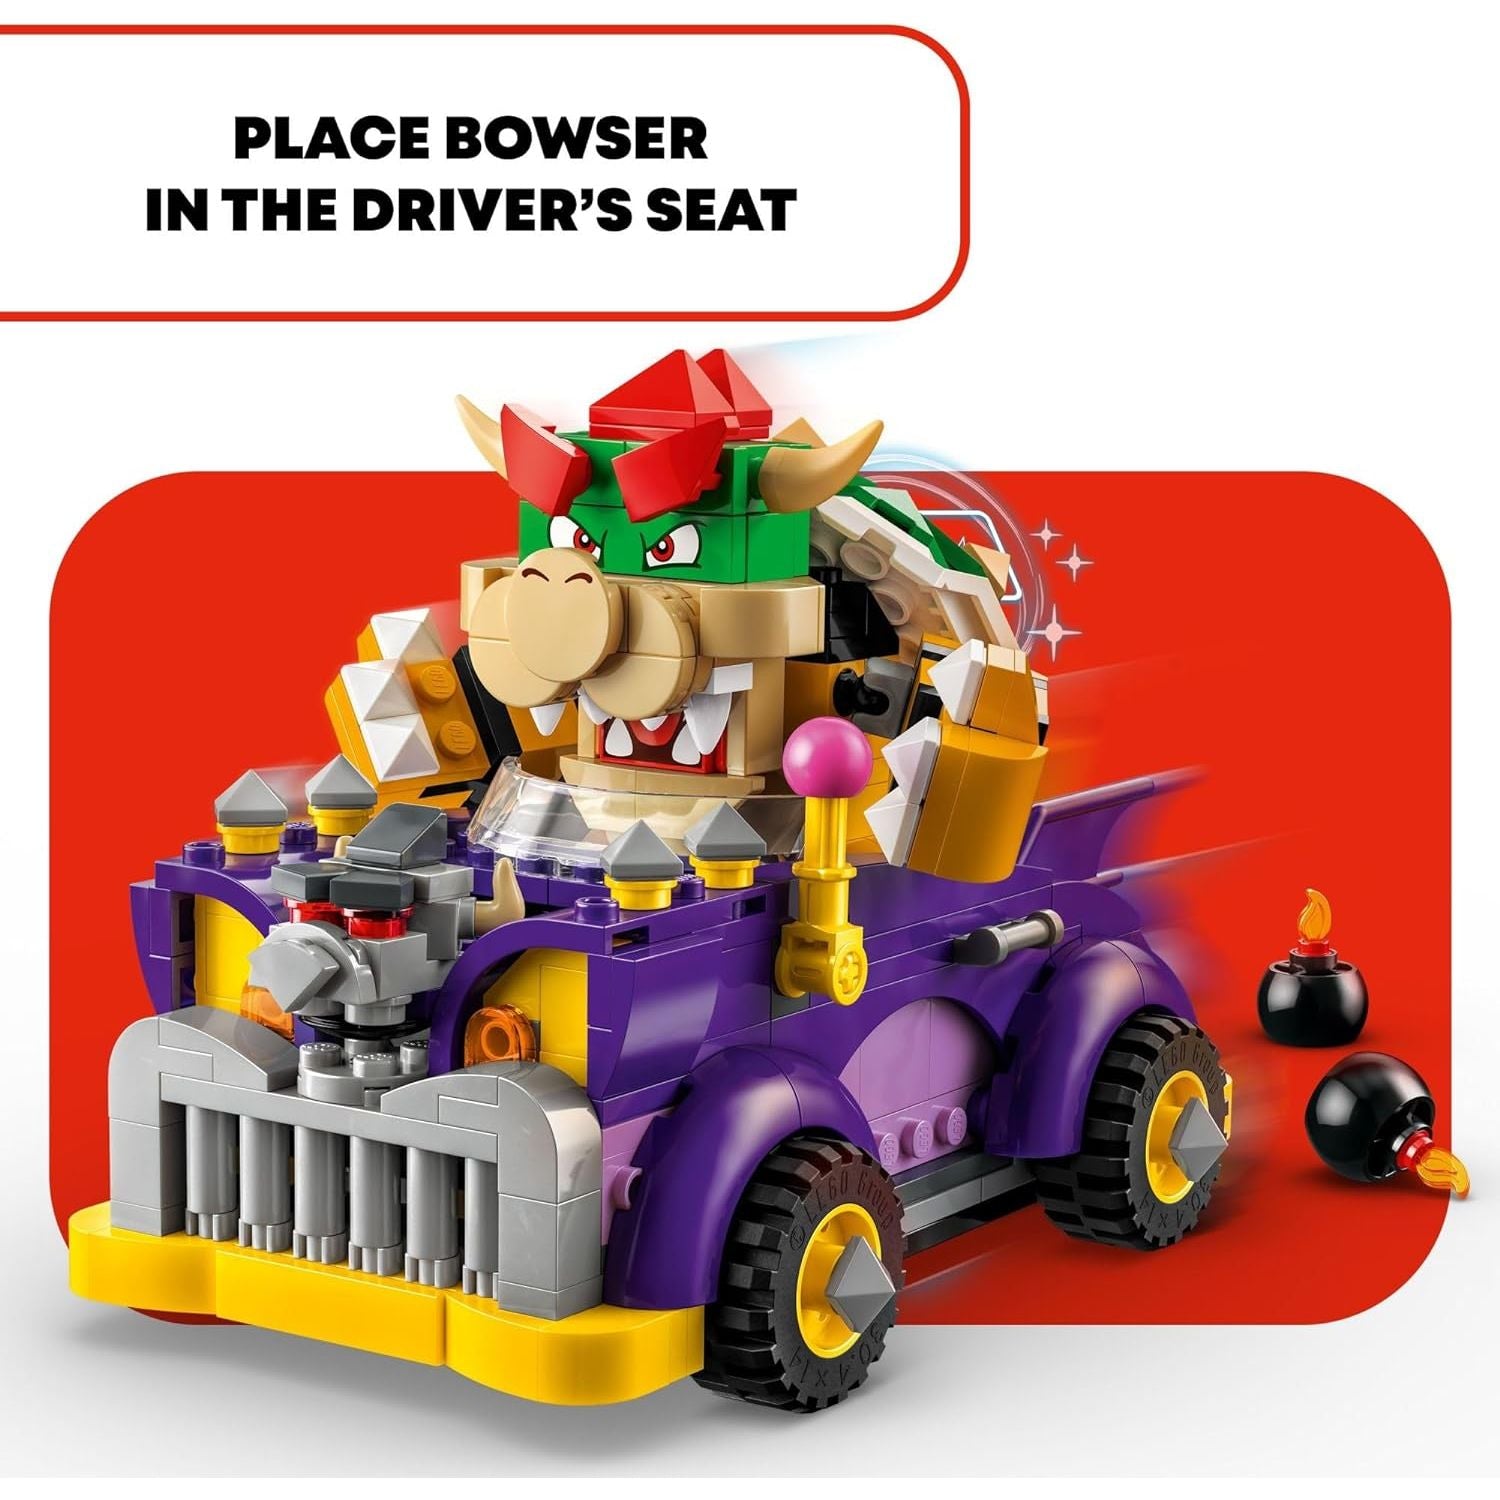 LEGO 71431 Super Mario Bowser’s Muscle Car Expansion Set, Collectible Bowser Toy for Kids.